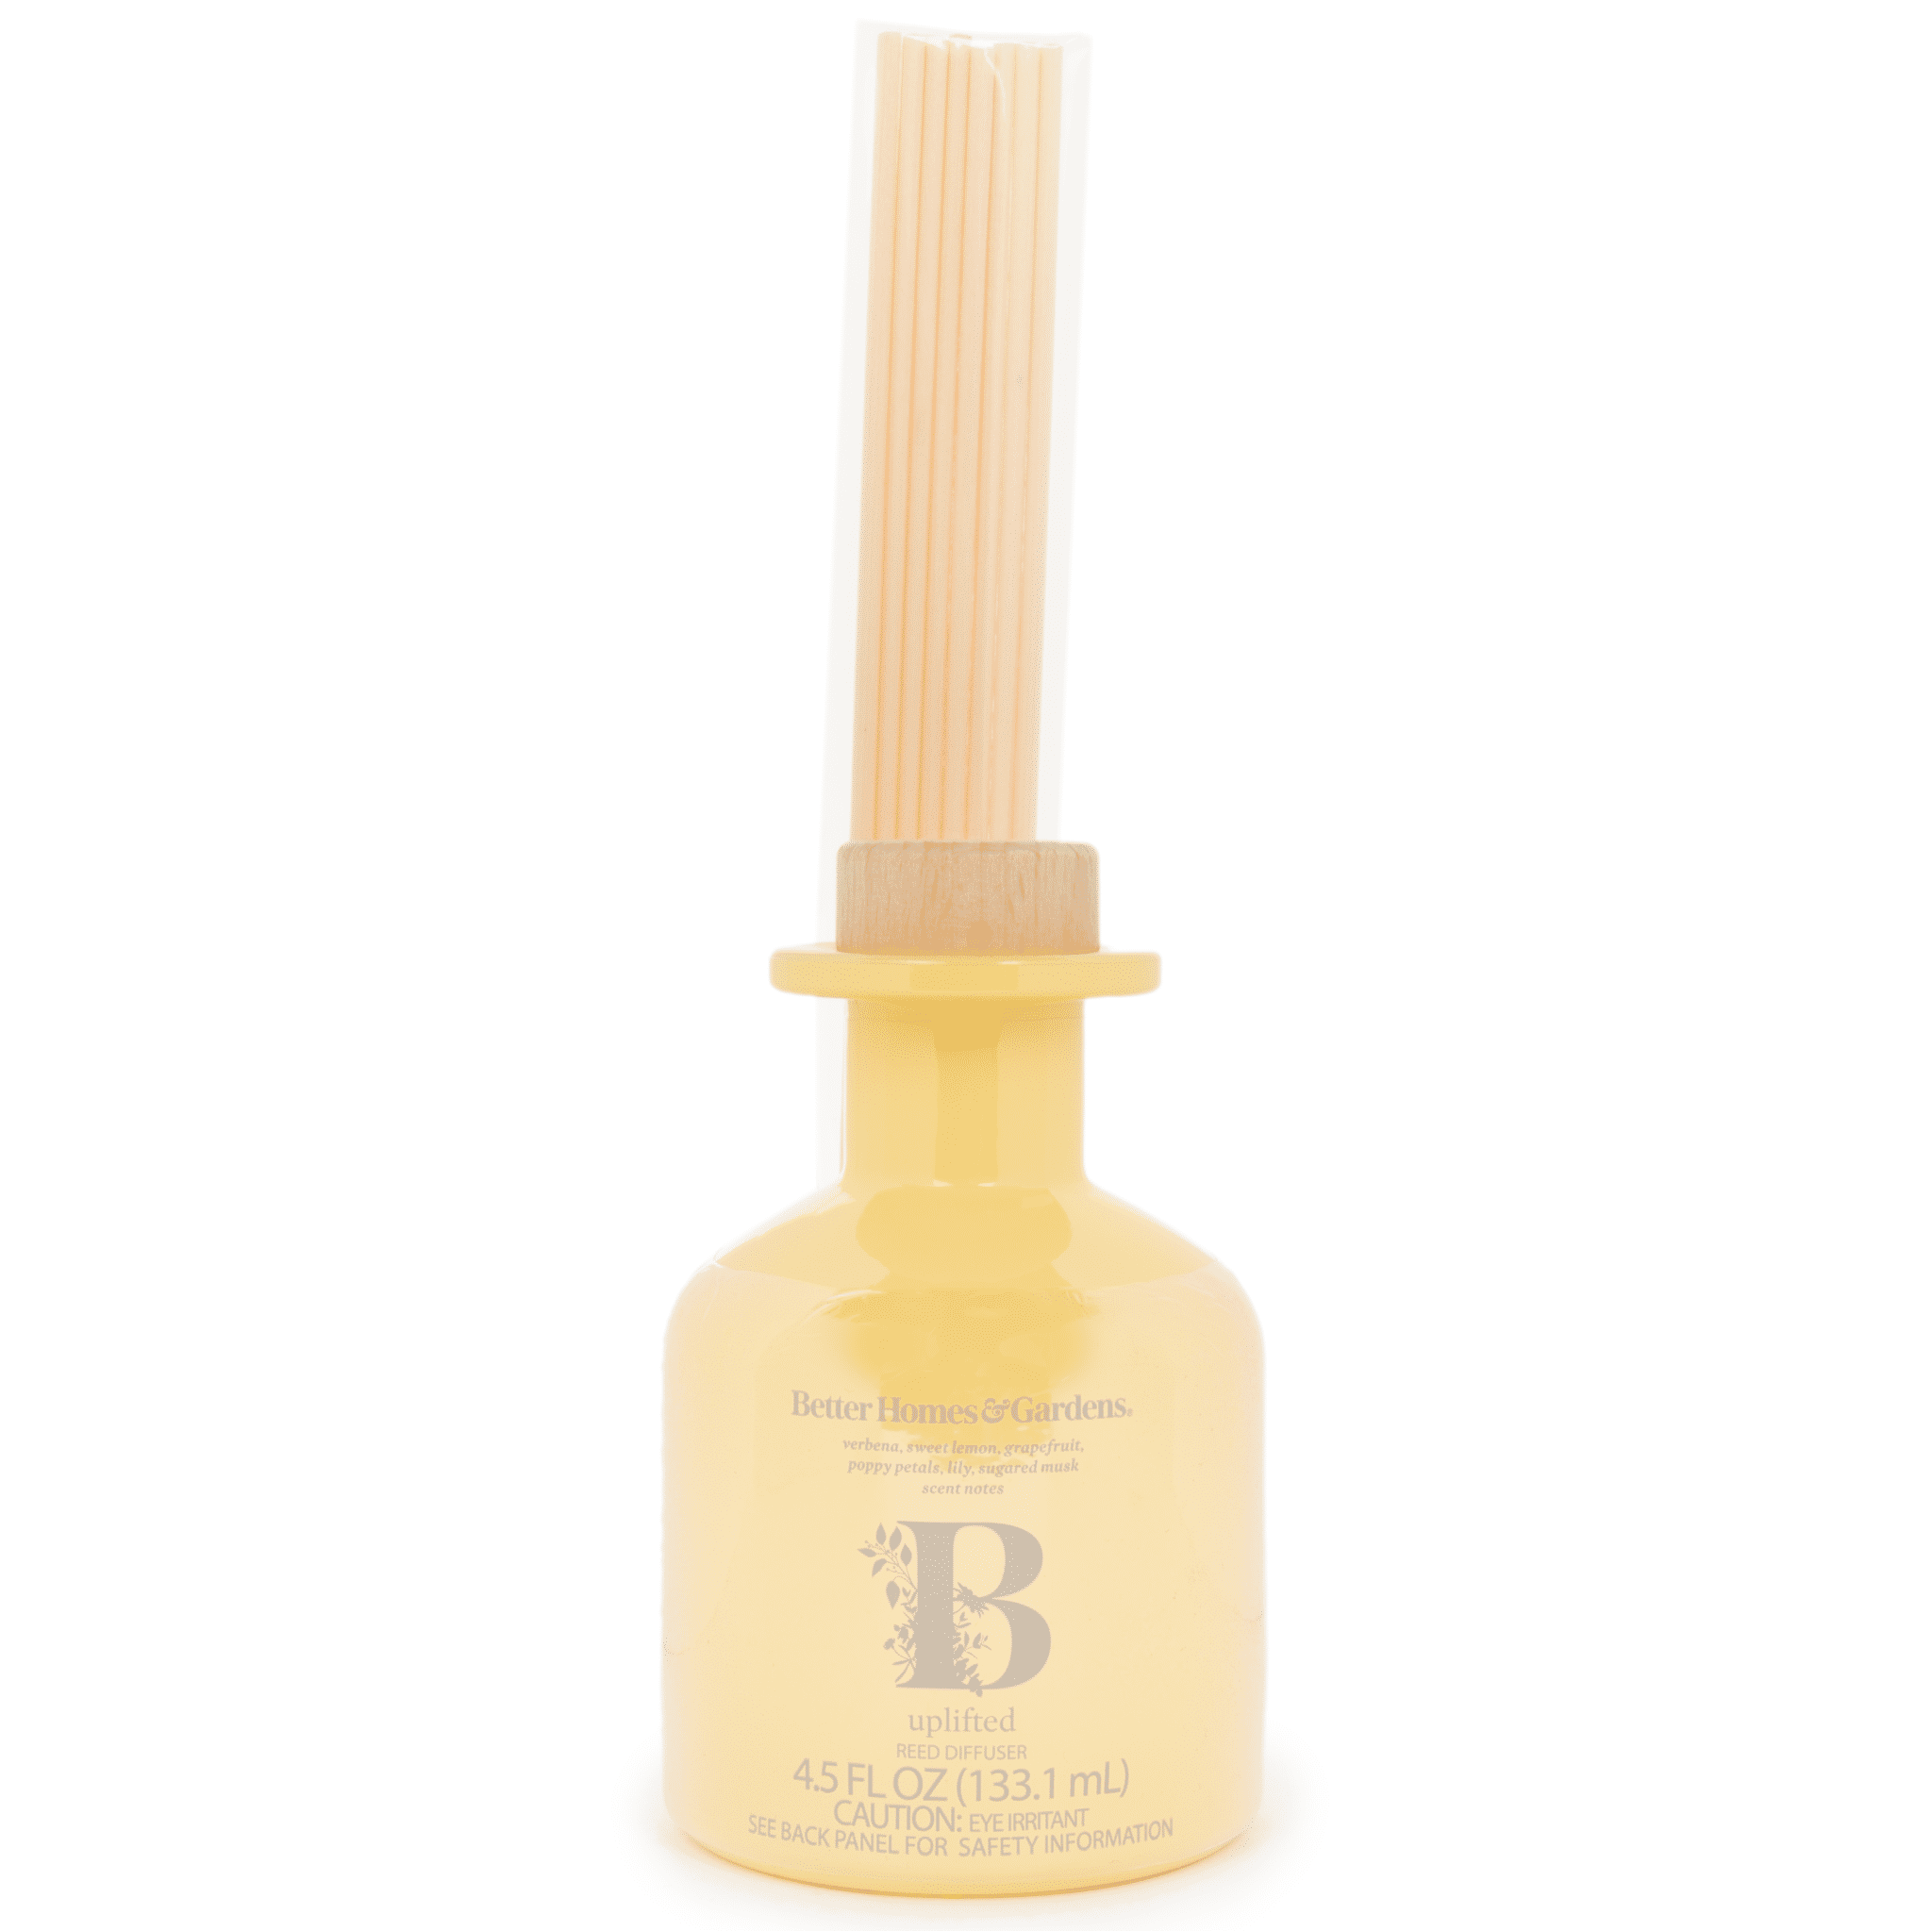 Better Homes & Gardens Scented Reed Diffuser, B Uplifted